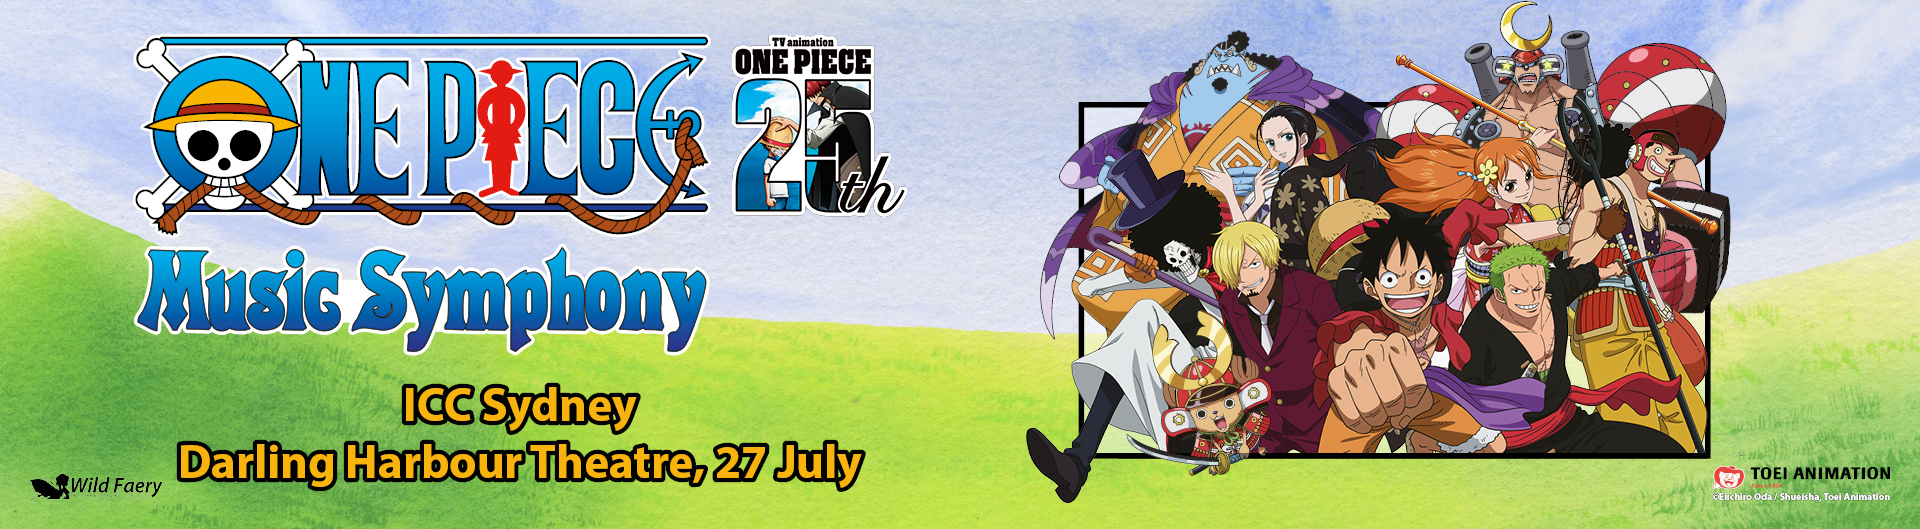 One Piece is coming to ICC Sydney's Darling Harbour Theatre on Saturday 27 July 2024.